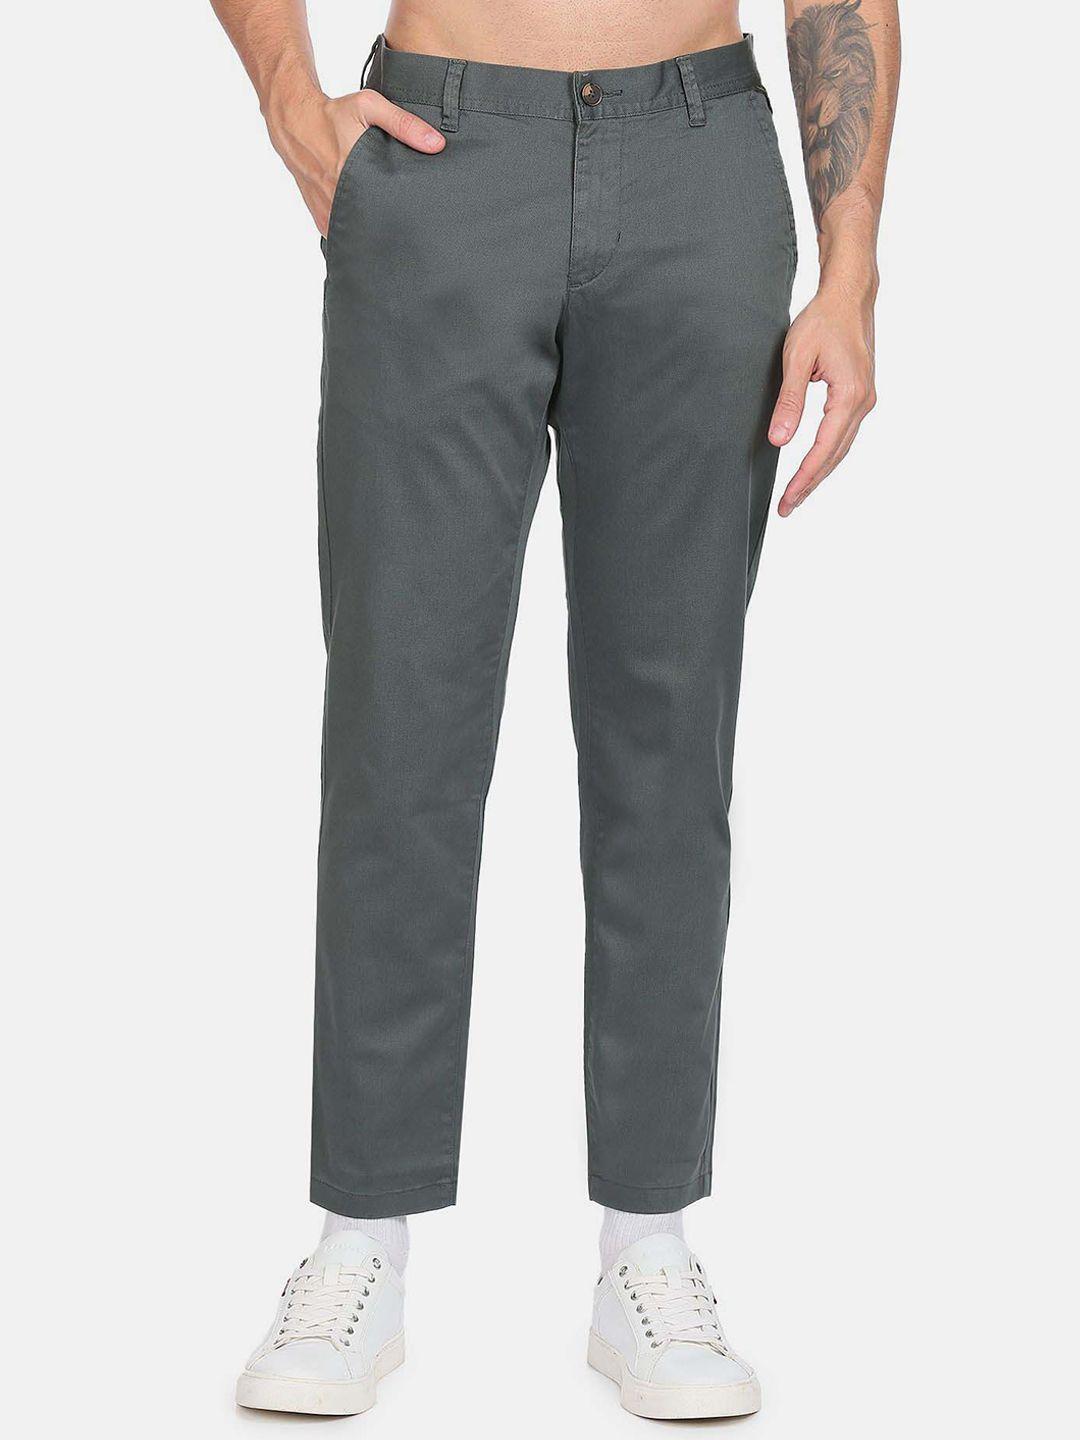 flying-machine-men-slim-fit-mid-rise-trousers